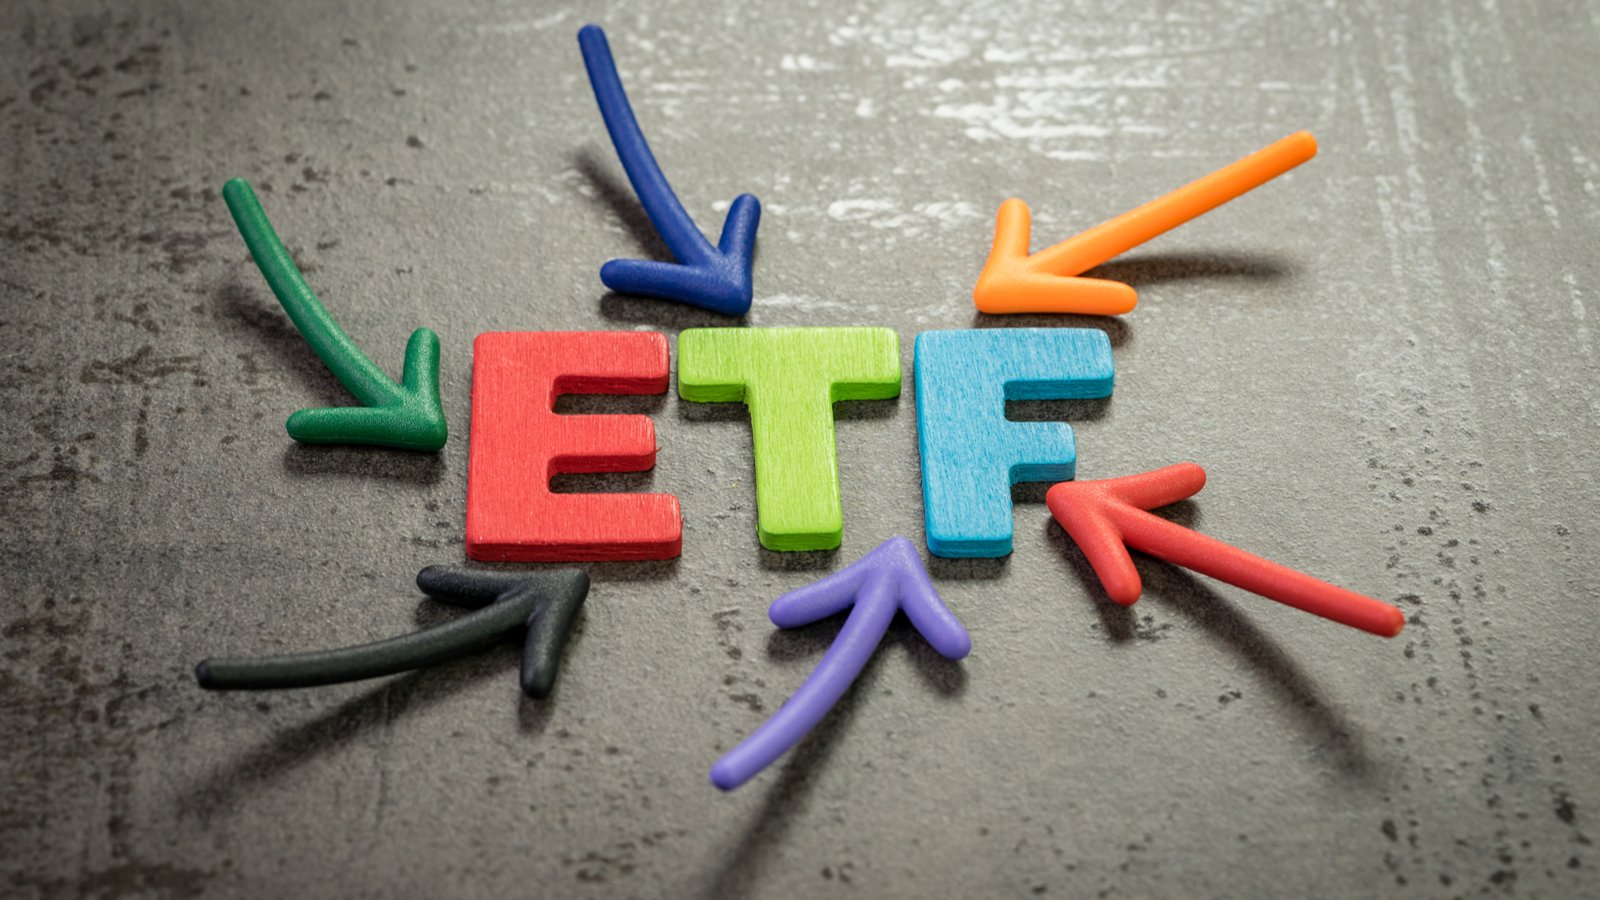 Colorful arrows pointing at the multicolored word "ETF" against a cement surface